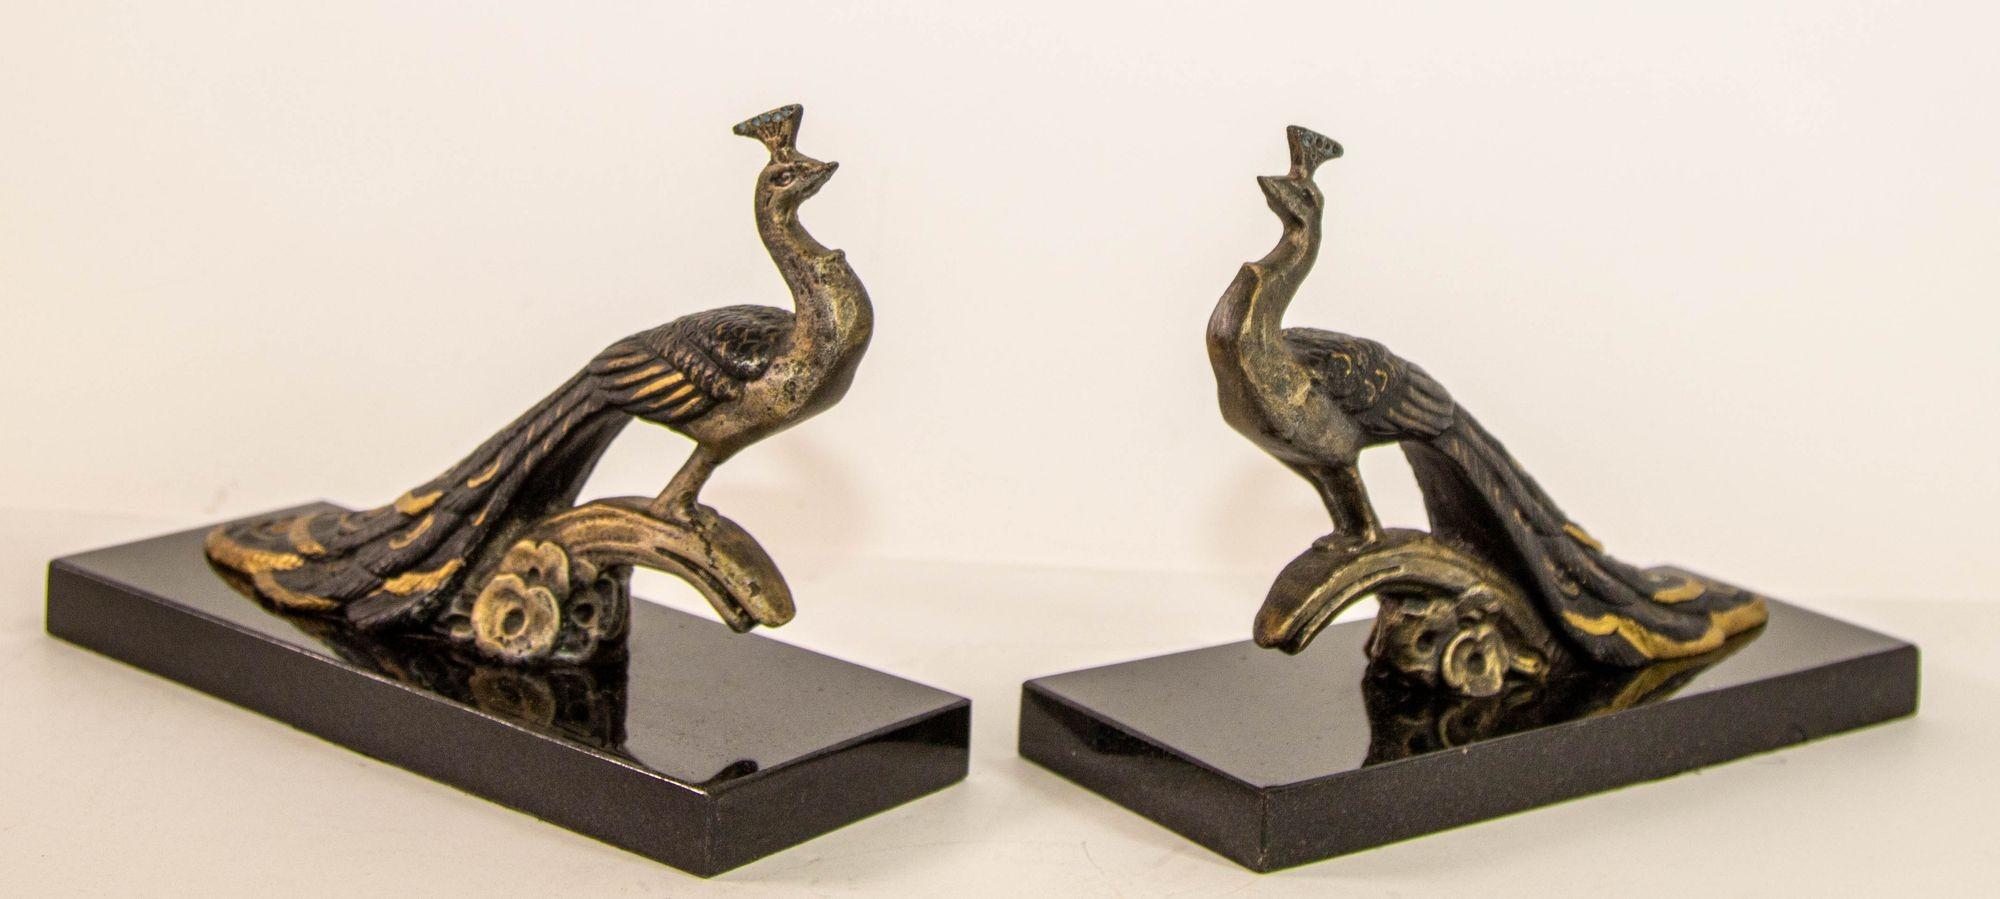 French Art Deco Style Pair Bronze Peacock Bookends on Marble Base.
Hollywood Regency pair of cast metal gilt bronze peacock book ends on black marble base.
Very decorative metal brass peacock standing on a branch.
This is a lovely pair with fine